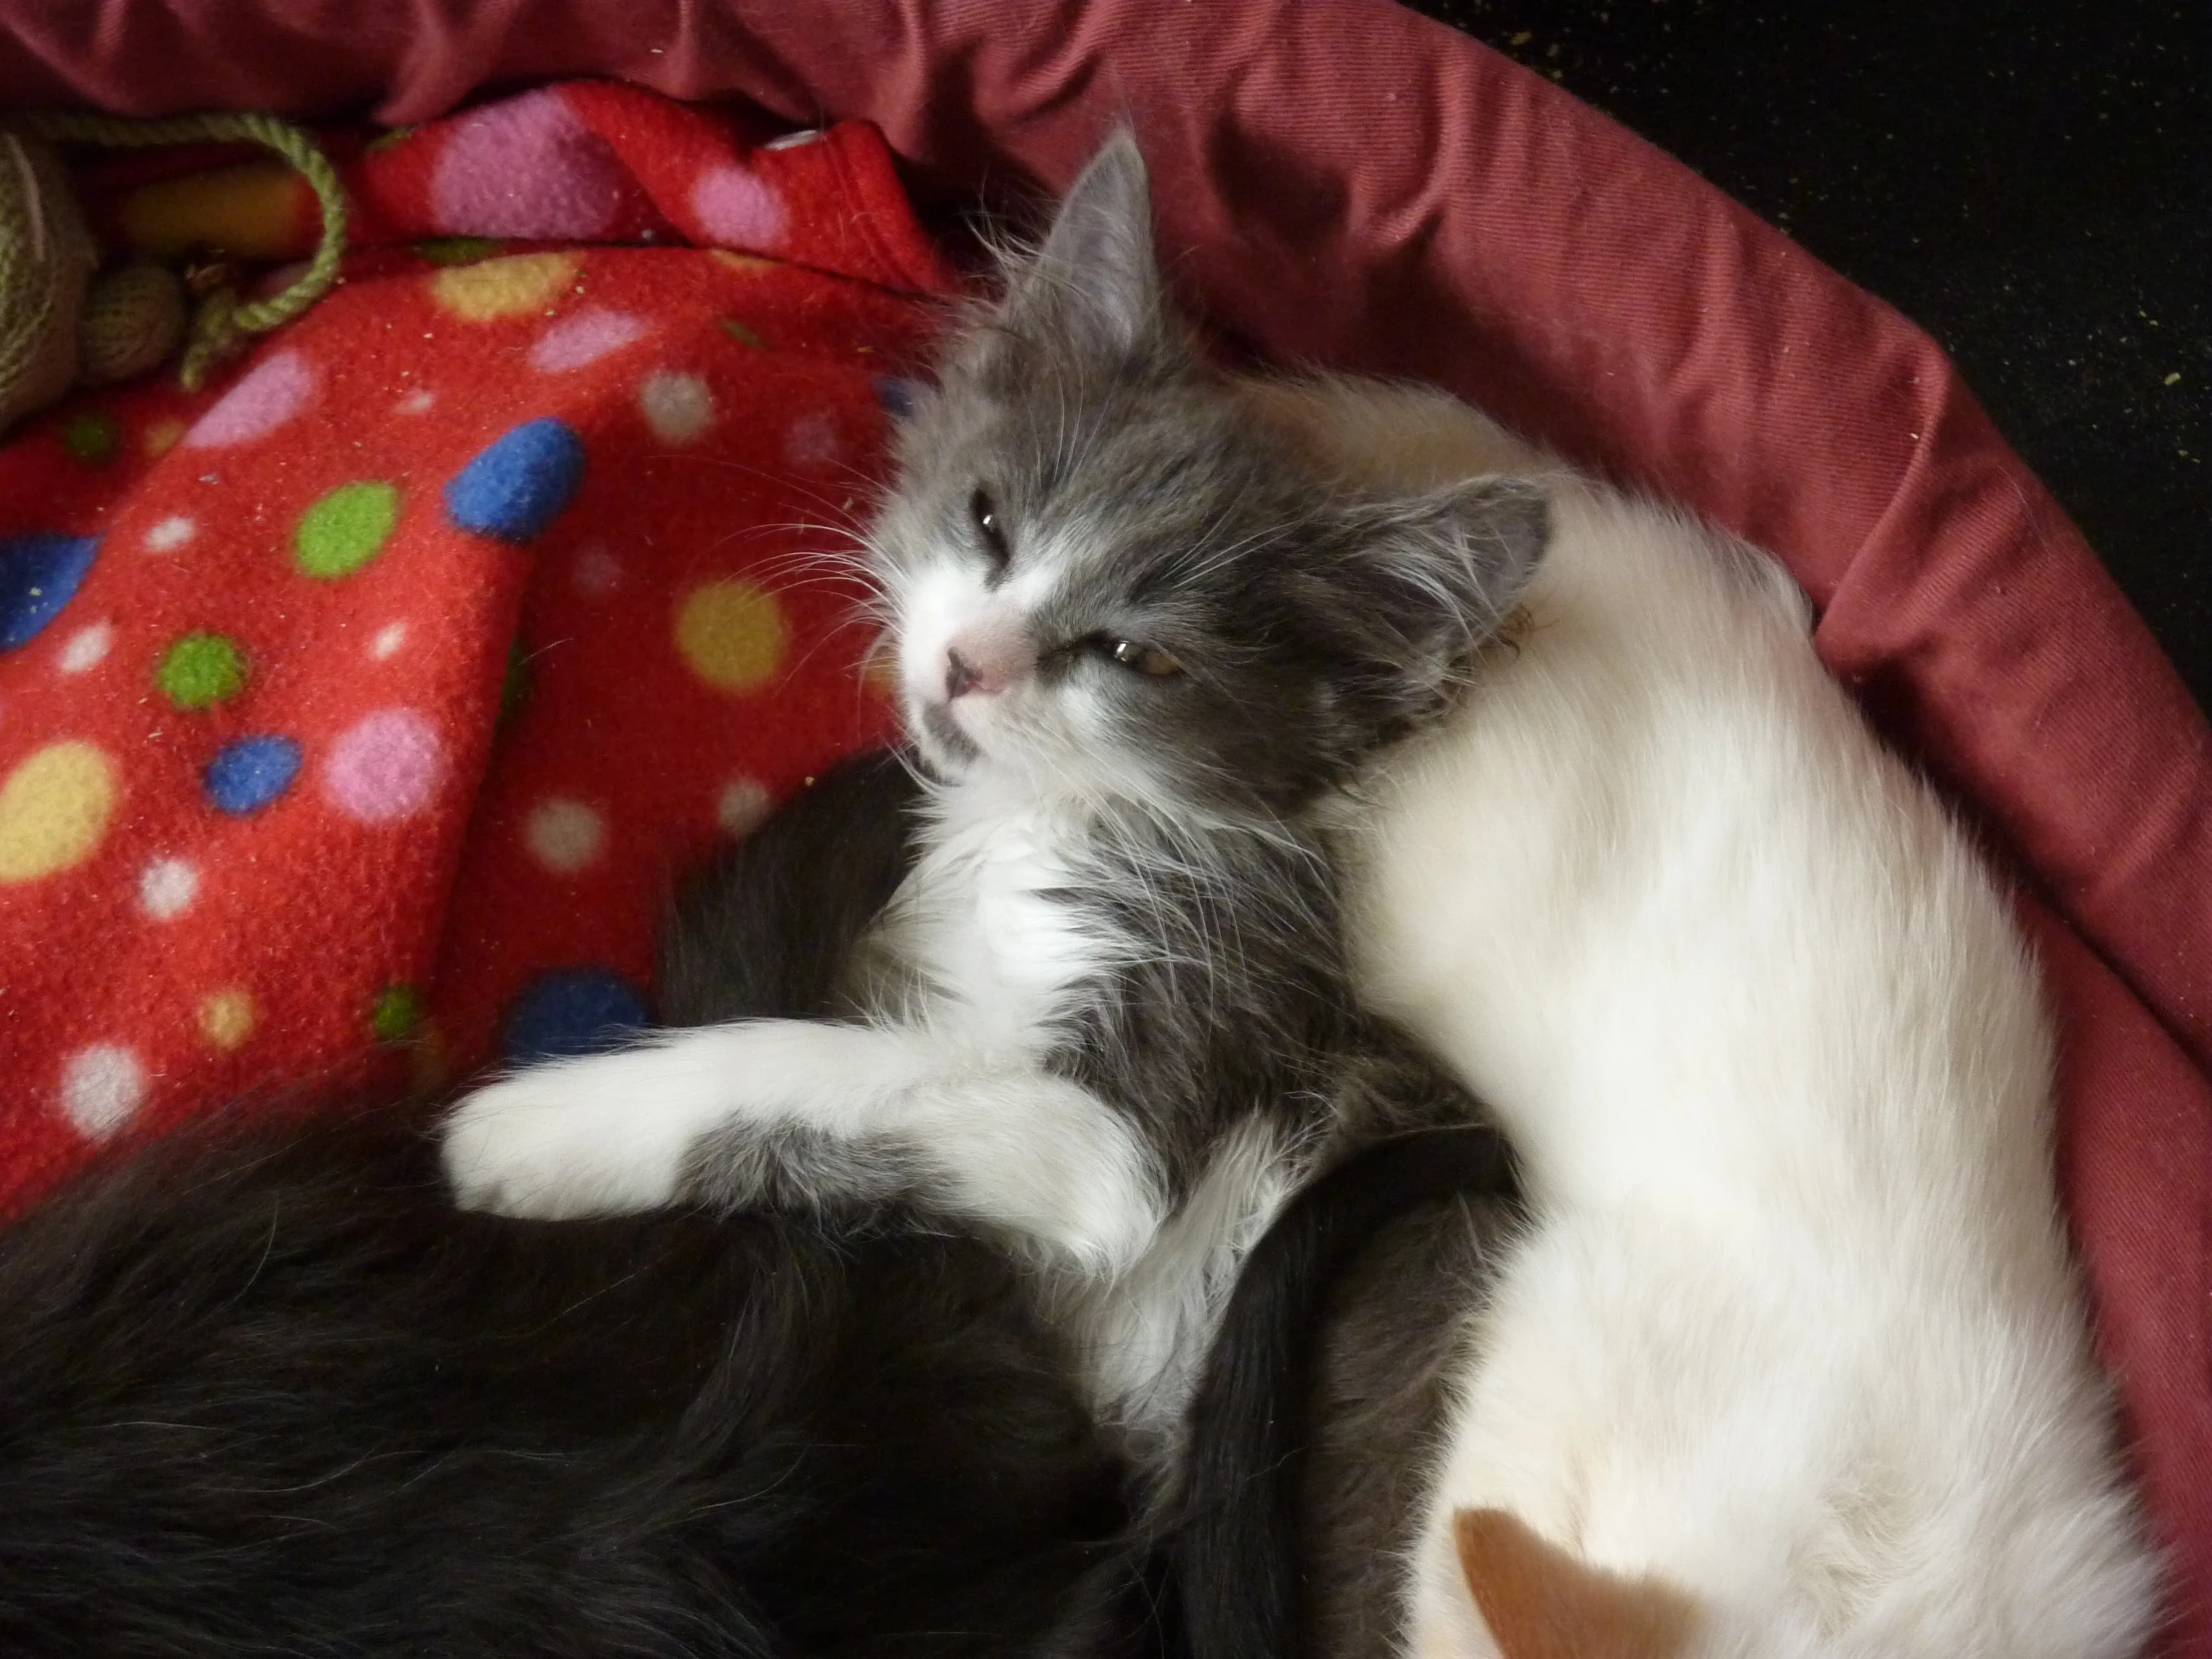 a kitten and a cat are sleeping on a blanket